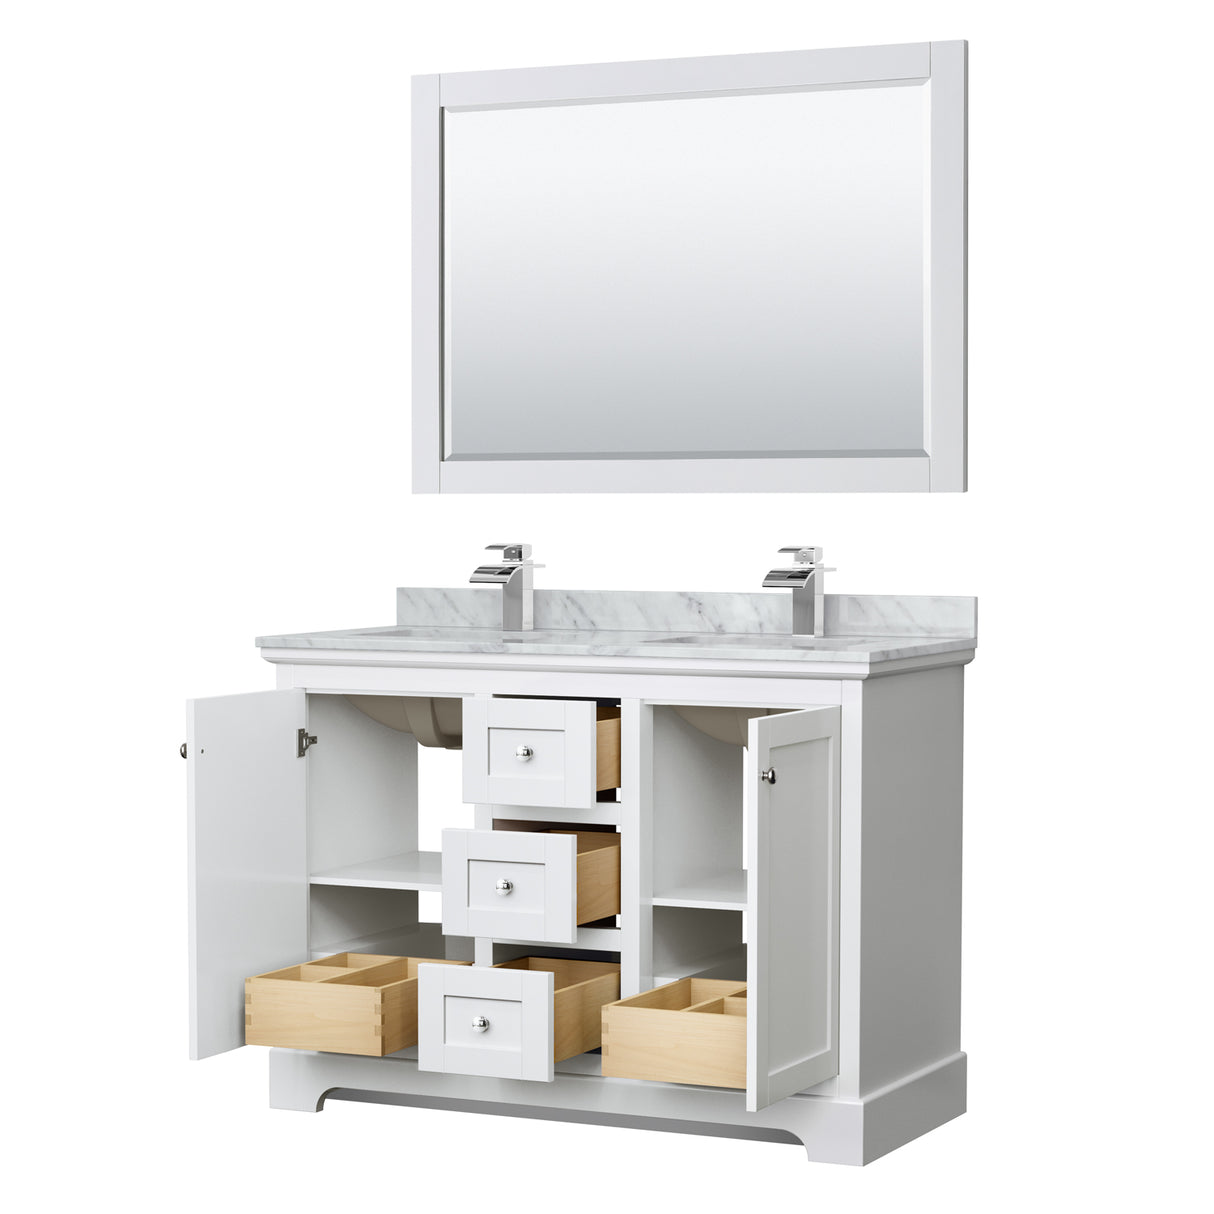 Avery 48 Inch Double Bathroom Vanity in White White Carrara Marble Countertop Undermount Square Sinks 46 Inch Mirror